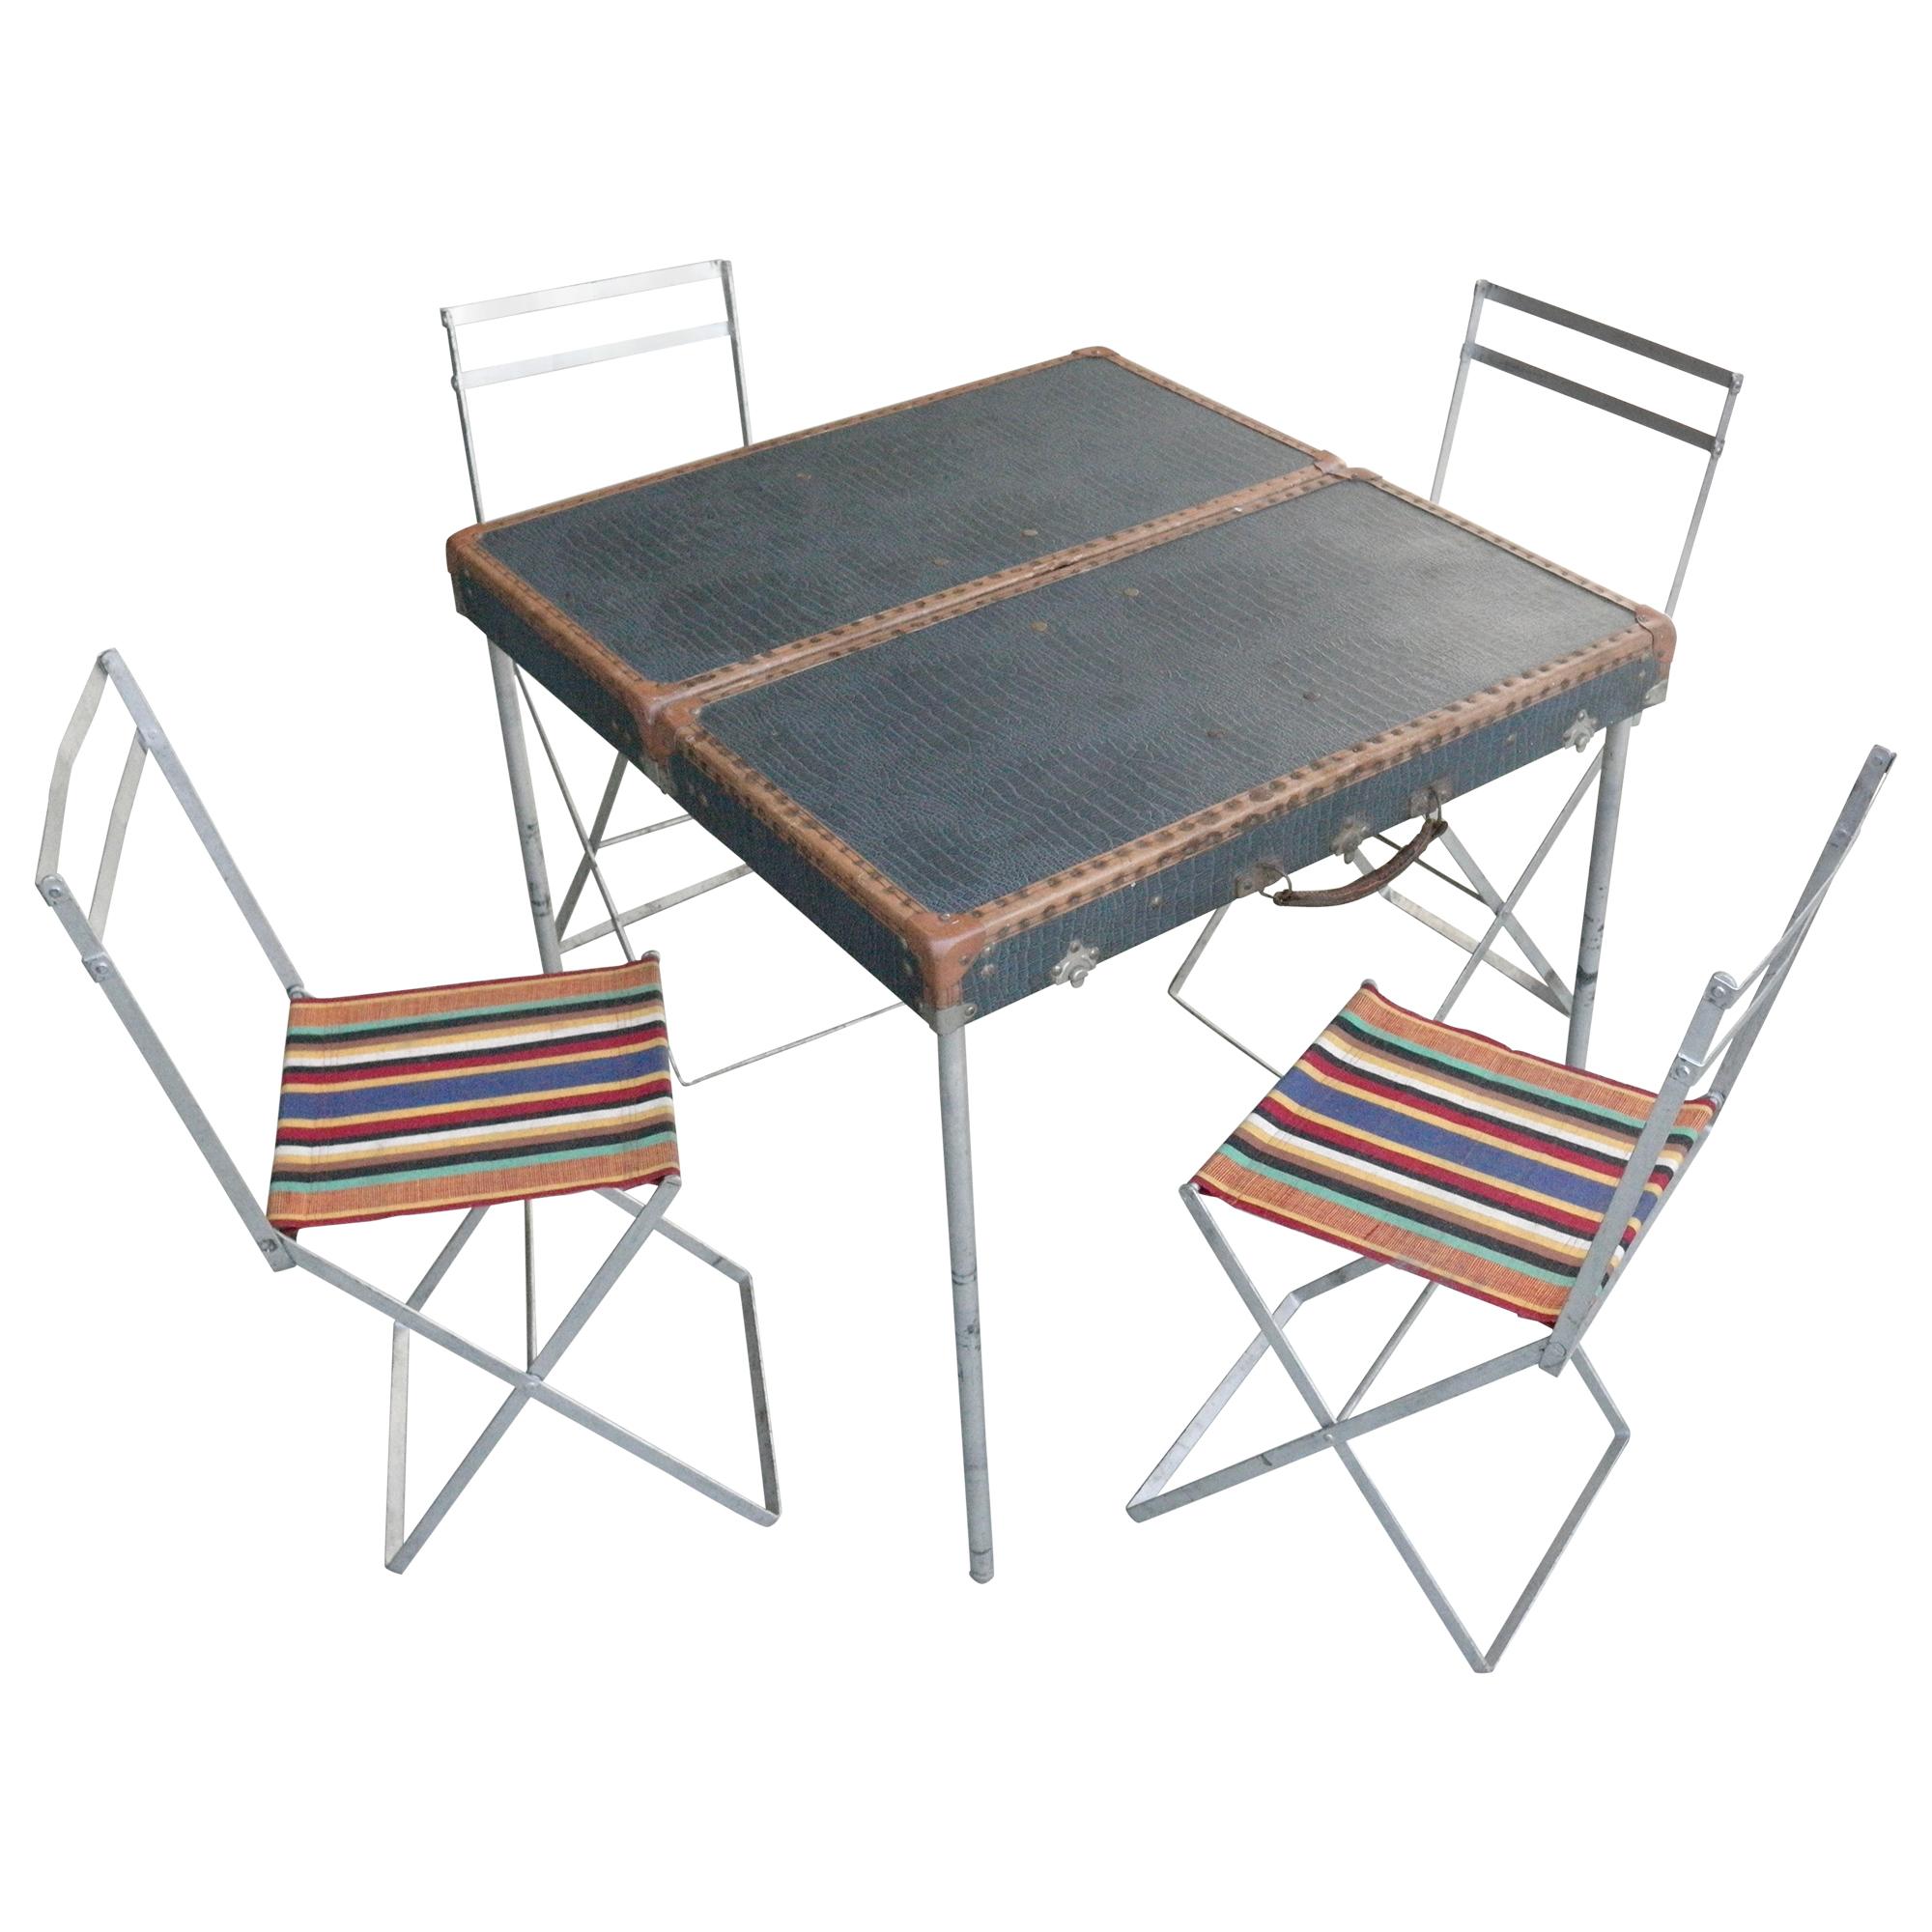 Jacques Biny Picnic Table and Chairs in Suitcase France 1950s by Kiss Ply